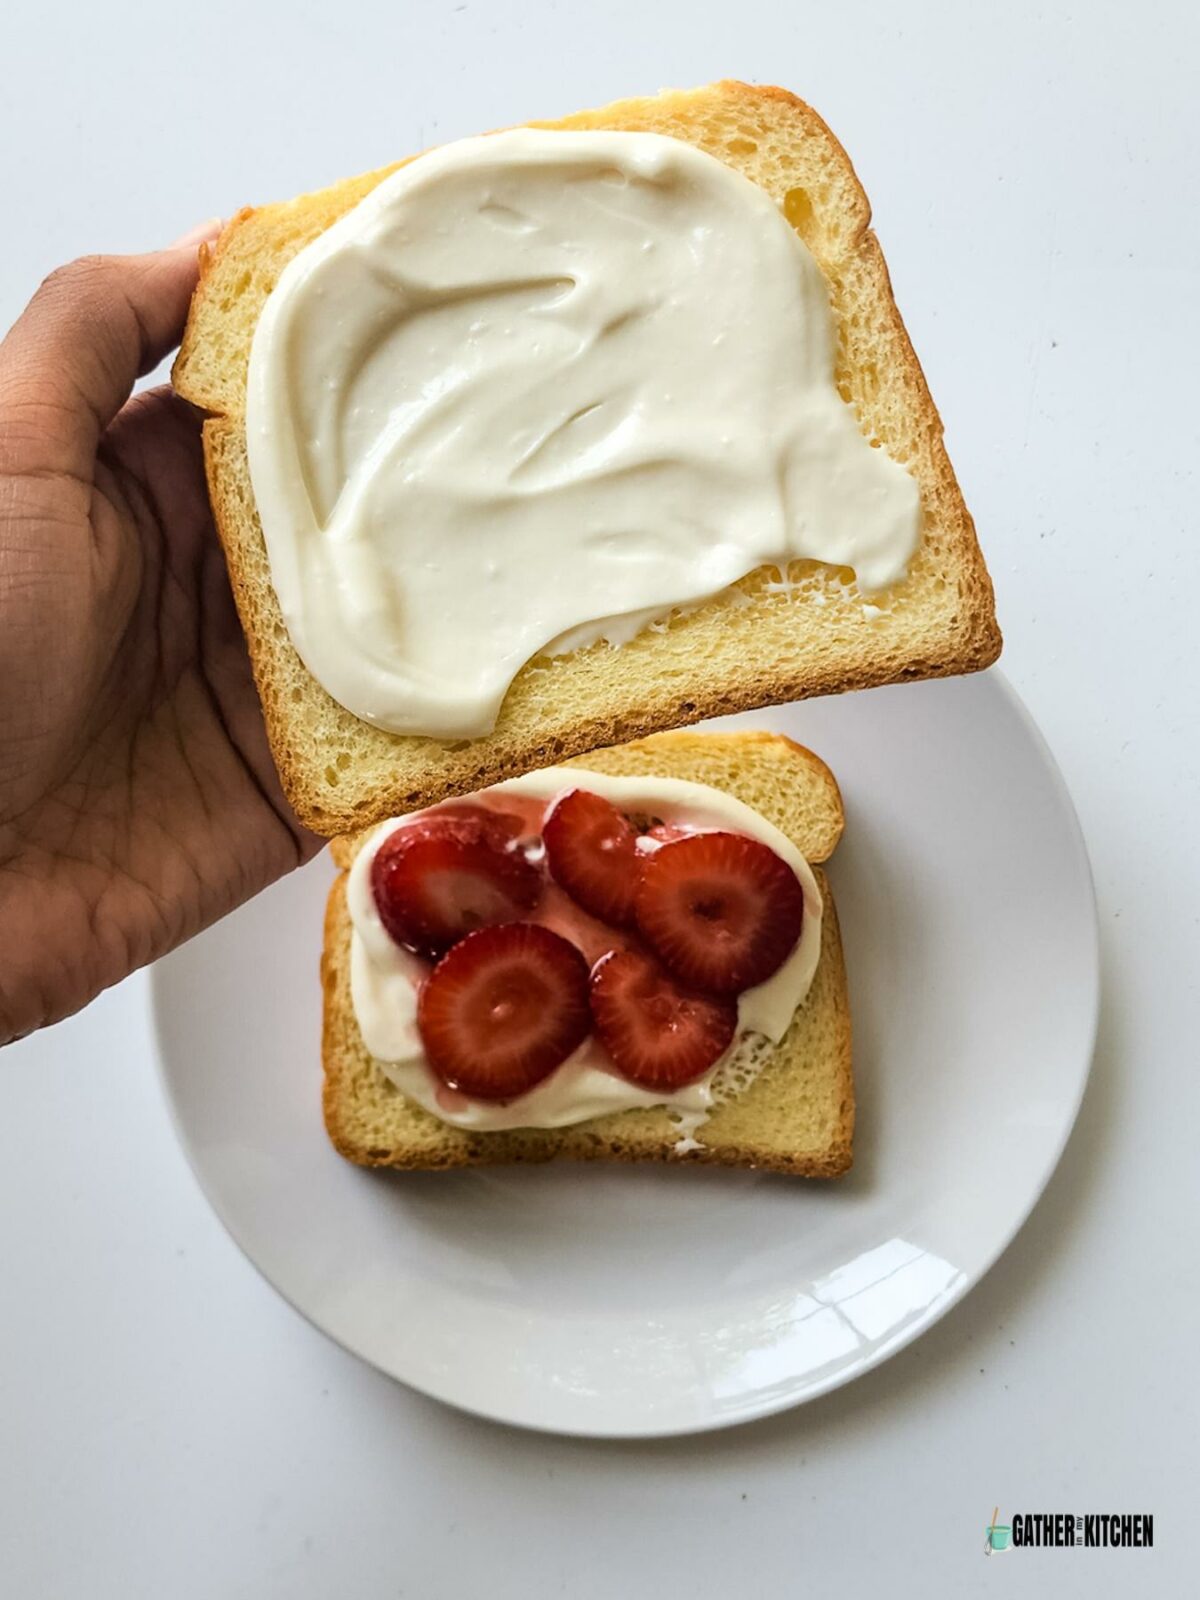 A piece of bread with cream cheese spread on it and a plate with a piece of bread with cream cheese and strawberries on it.